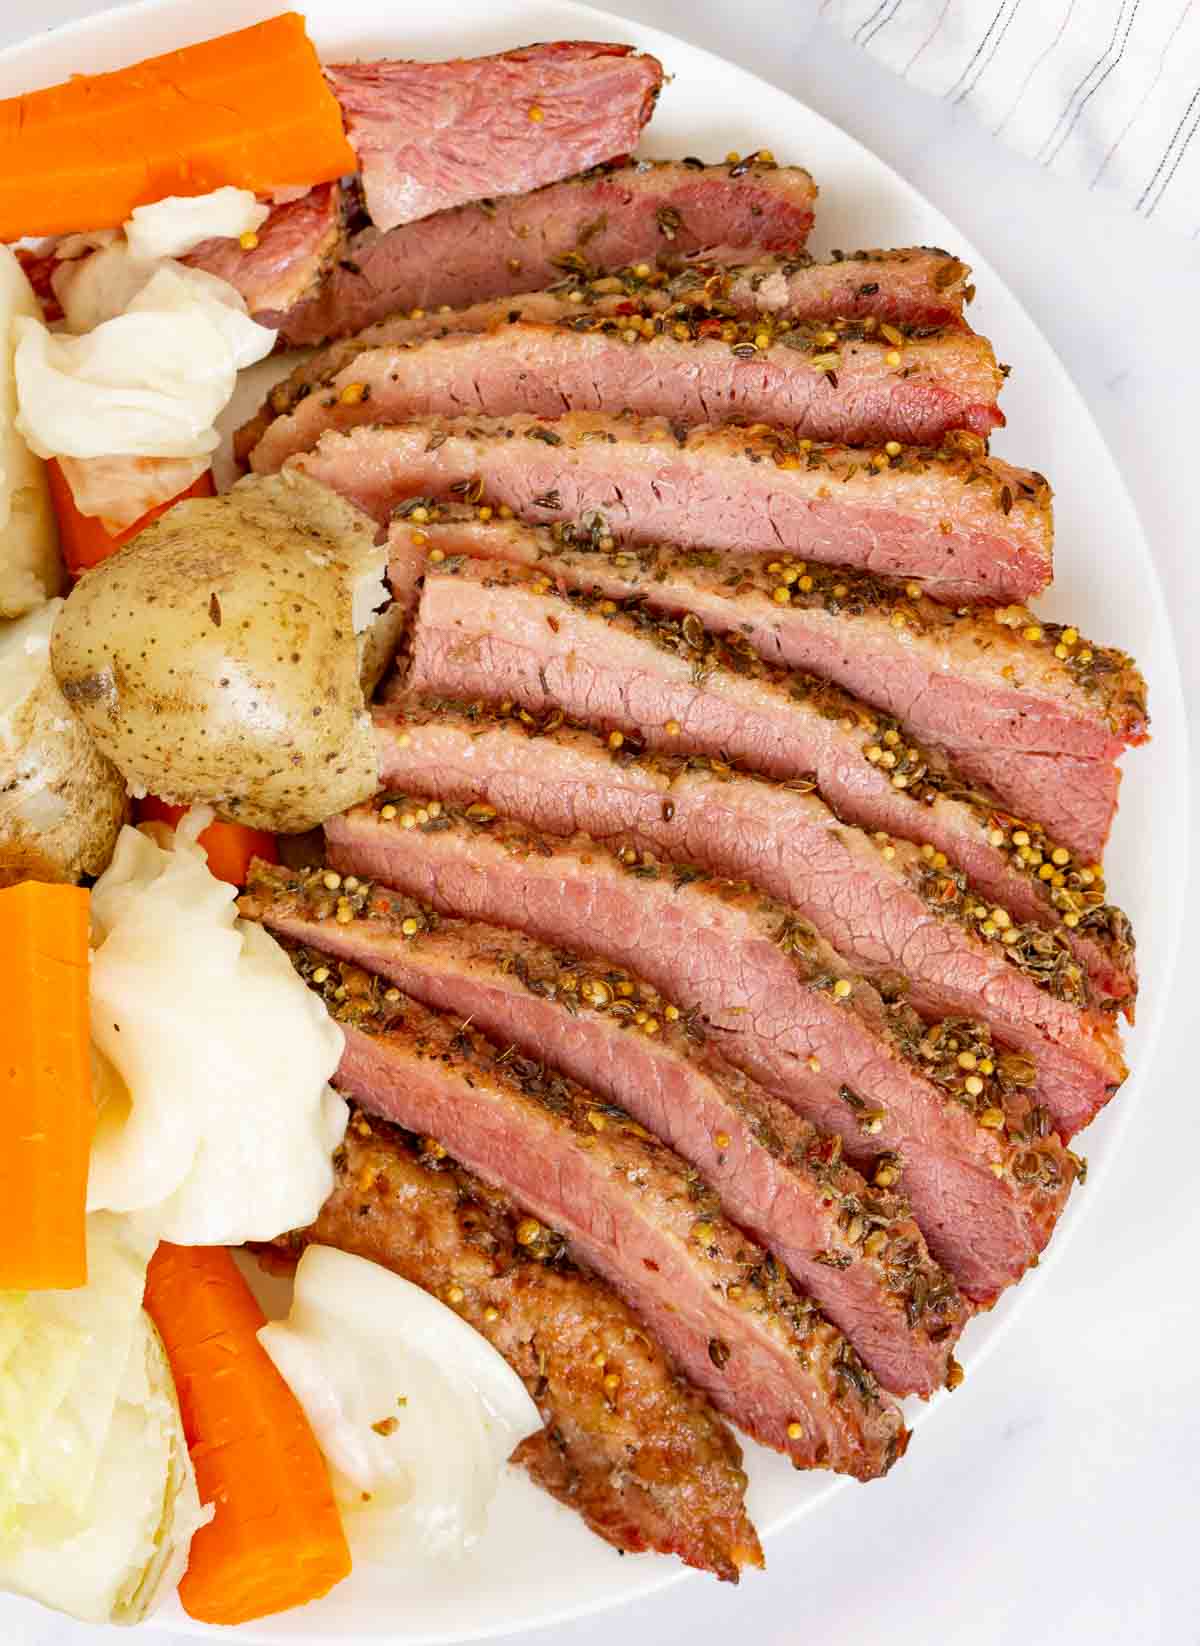 Sliced corned beef on a plate next to potatoes, cabbage, and carrots.